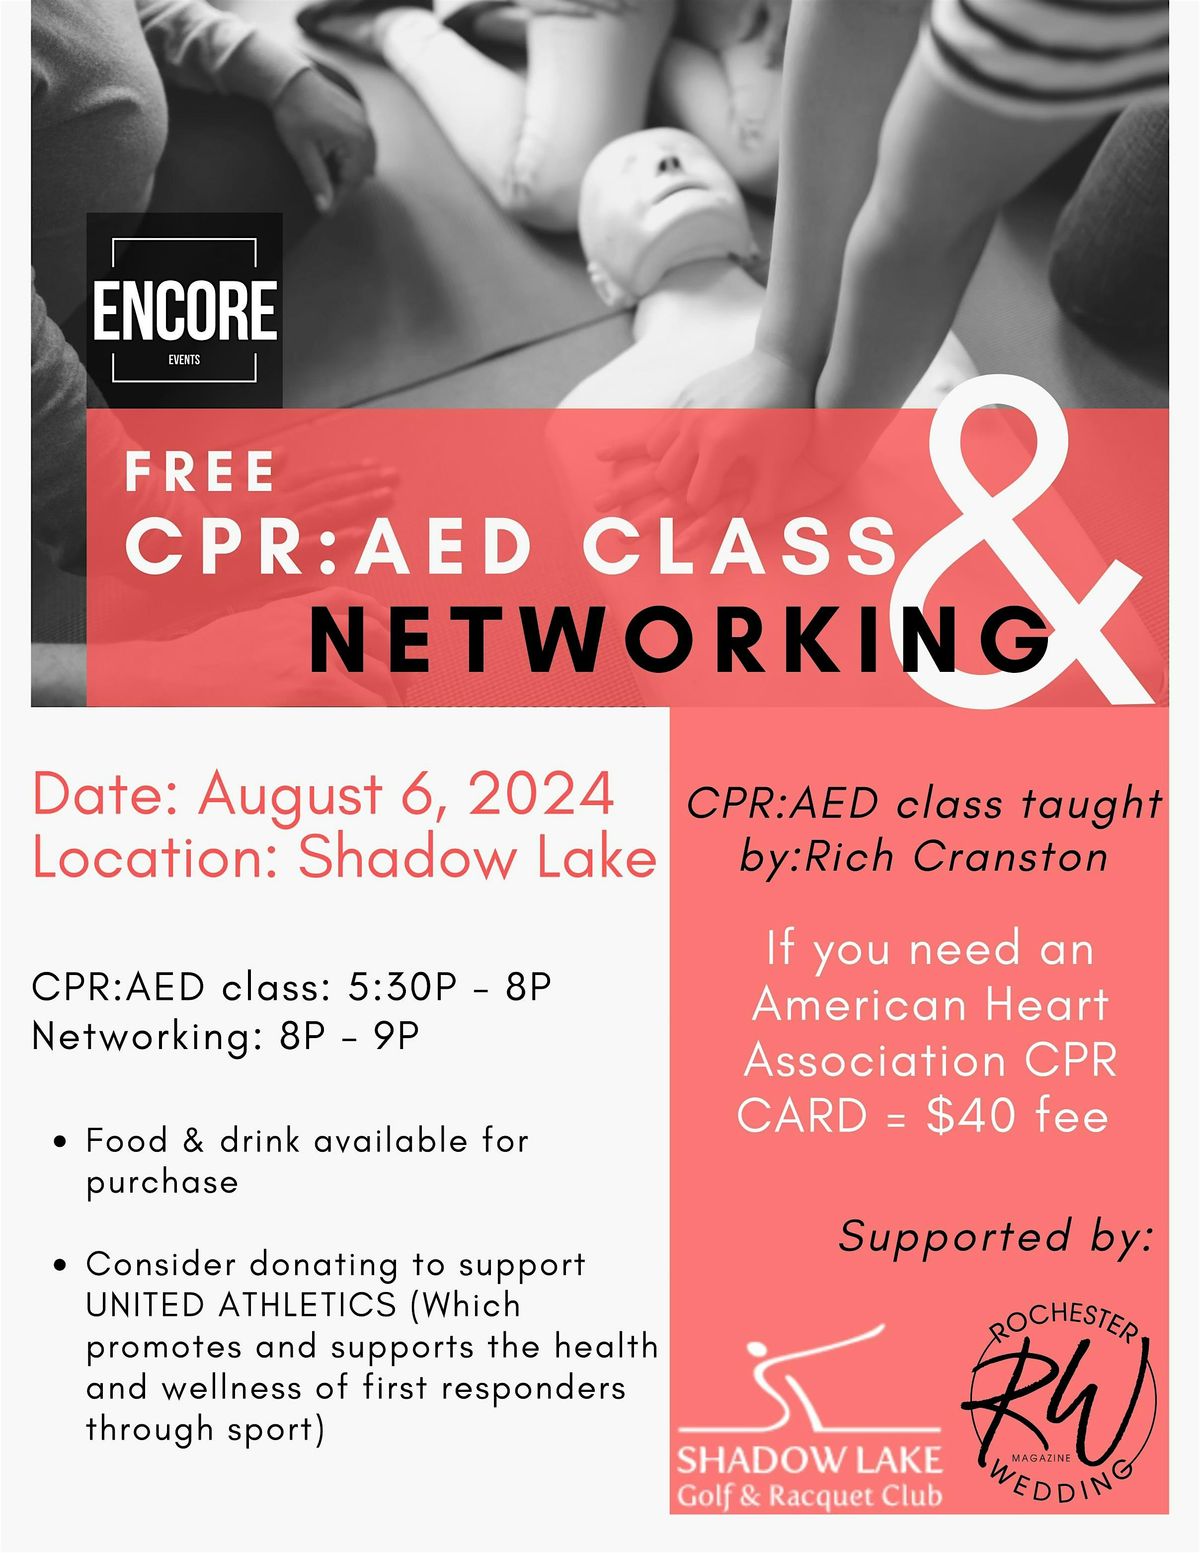 Wedding Pro CPR:AED Training and Networking